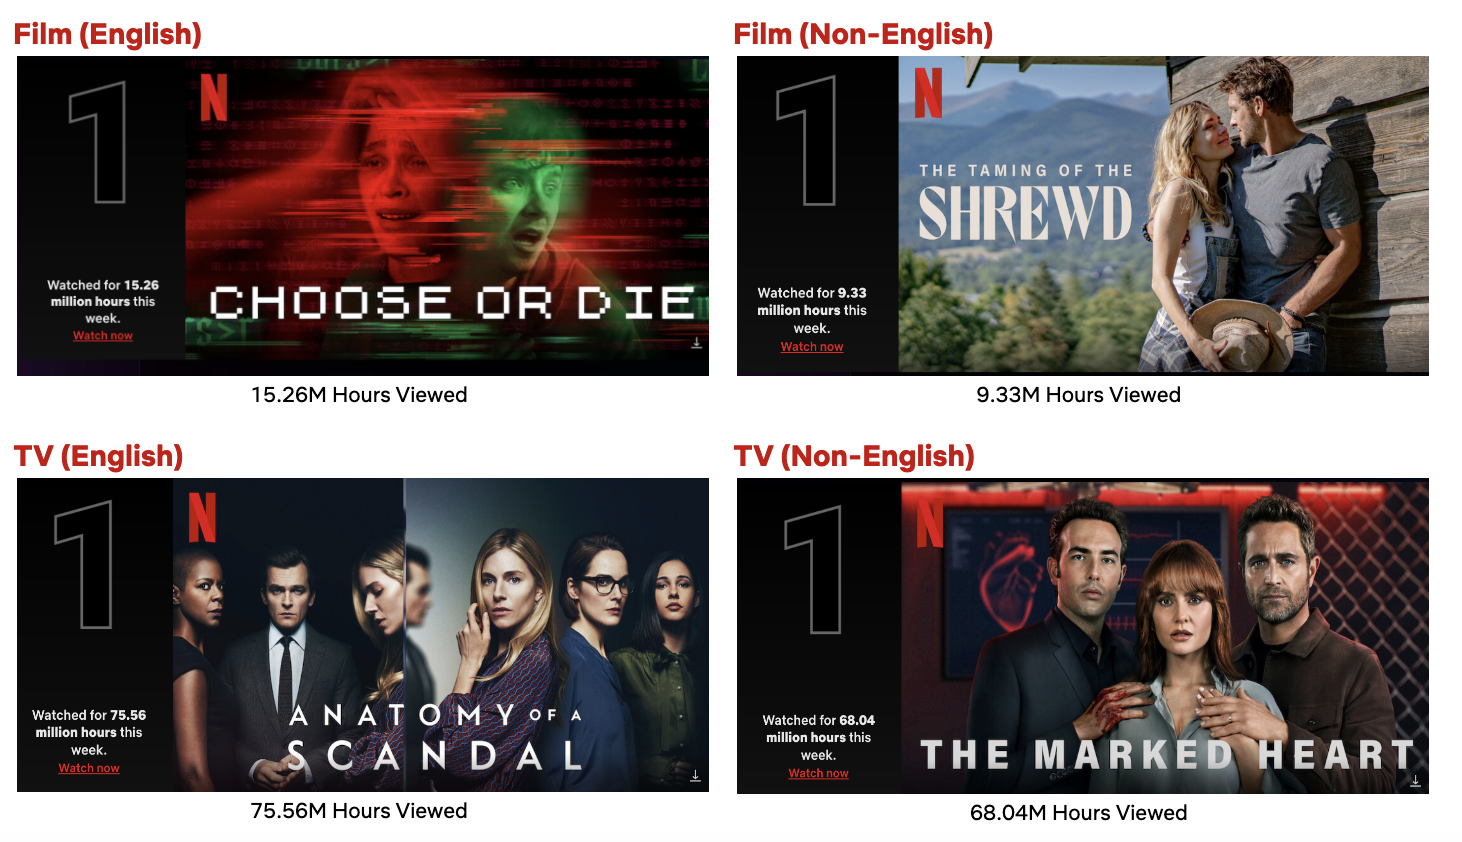 Top 10 Week of April 18: ‘Anatomy of a Scandal’ Is the Week’s Most Viewed Title,  ‘The Marked Heart’ Tops Non-English TV List  